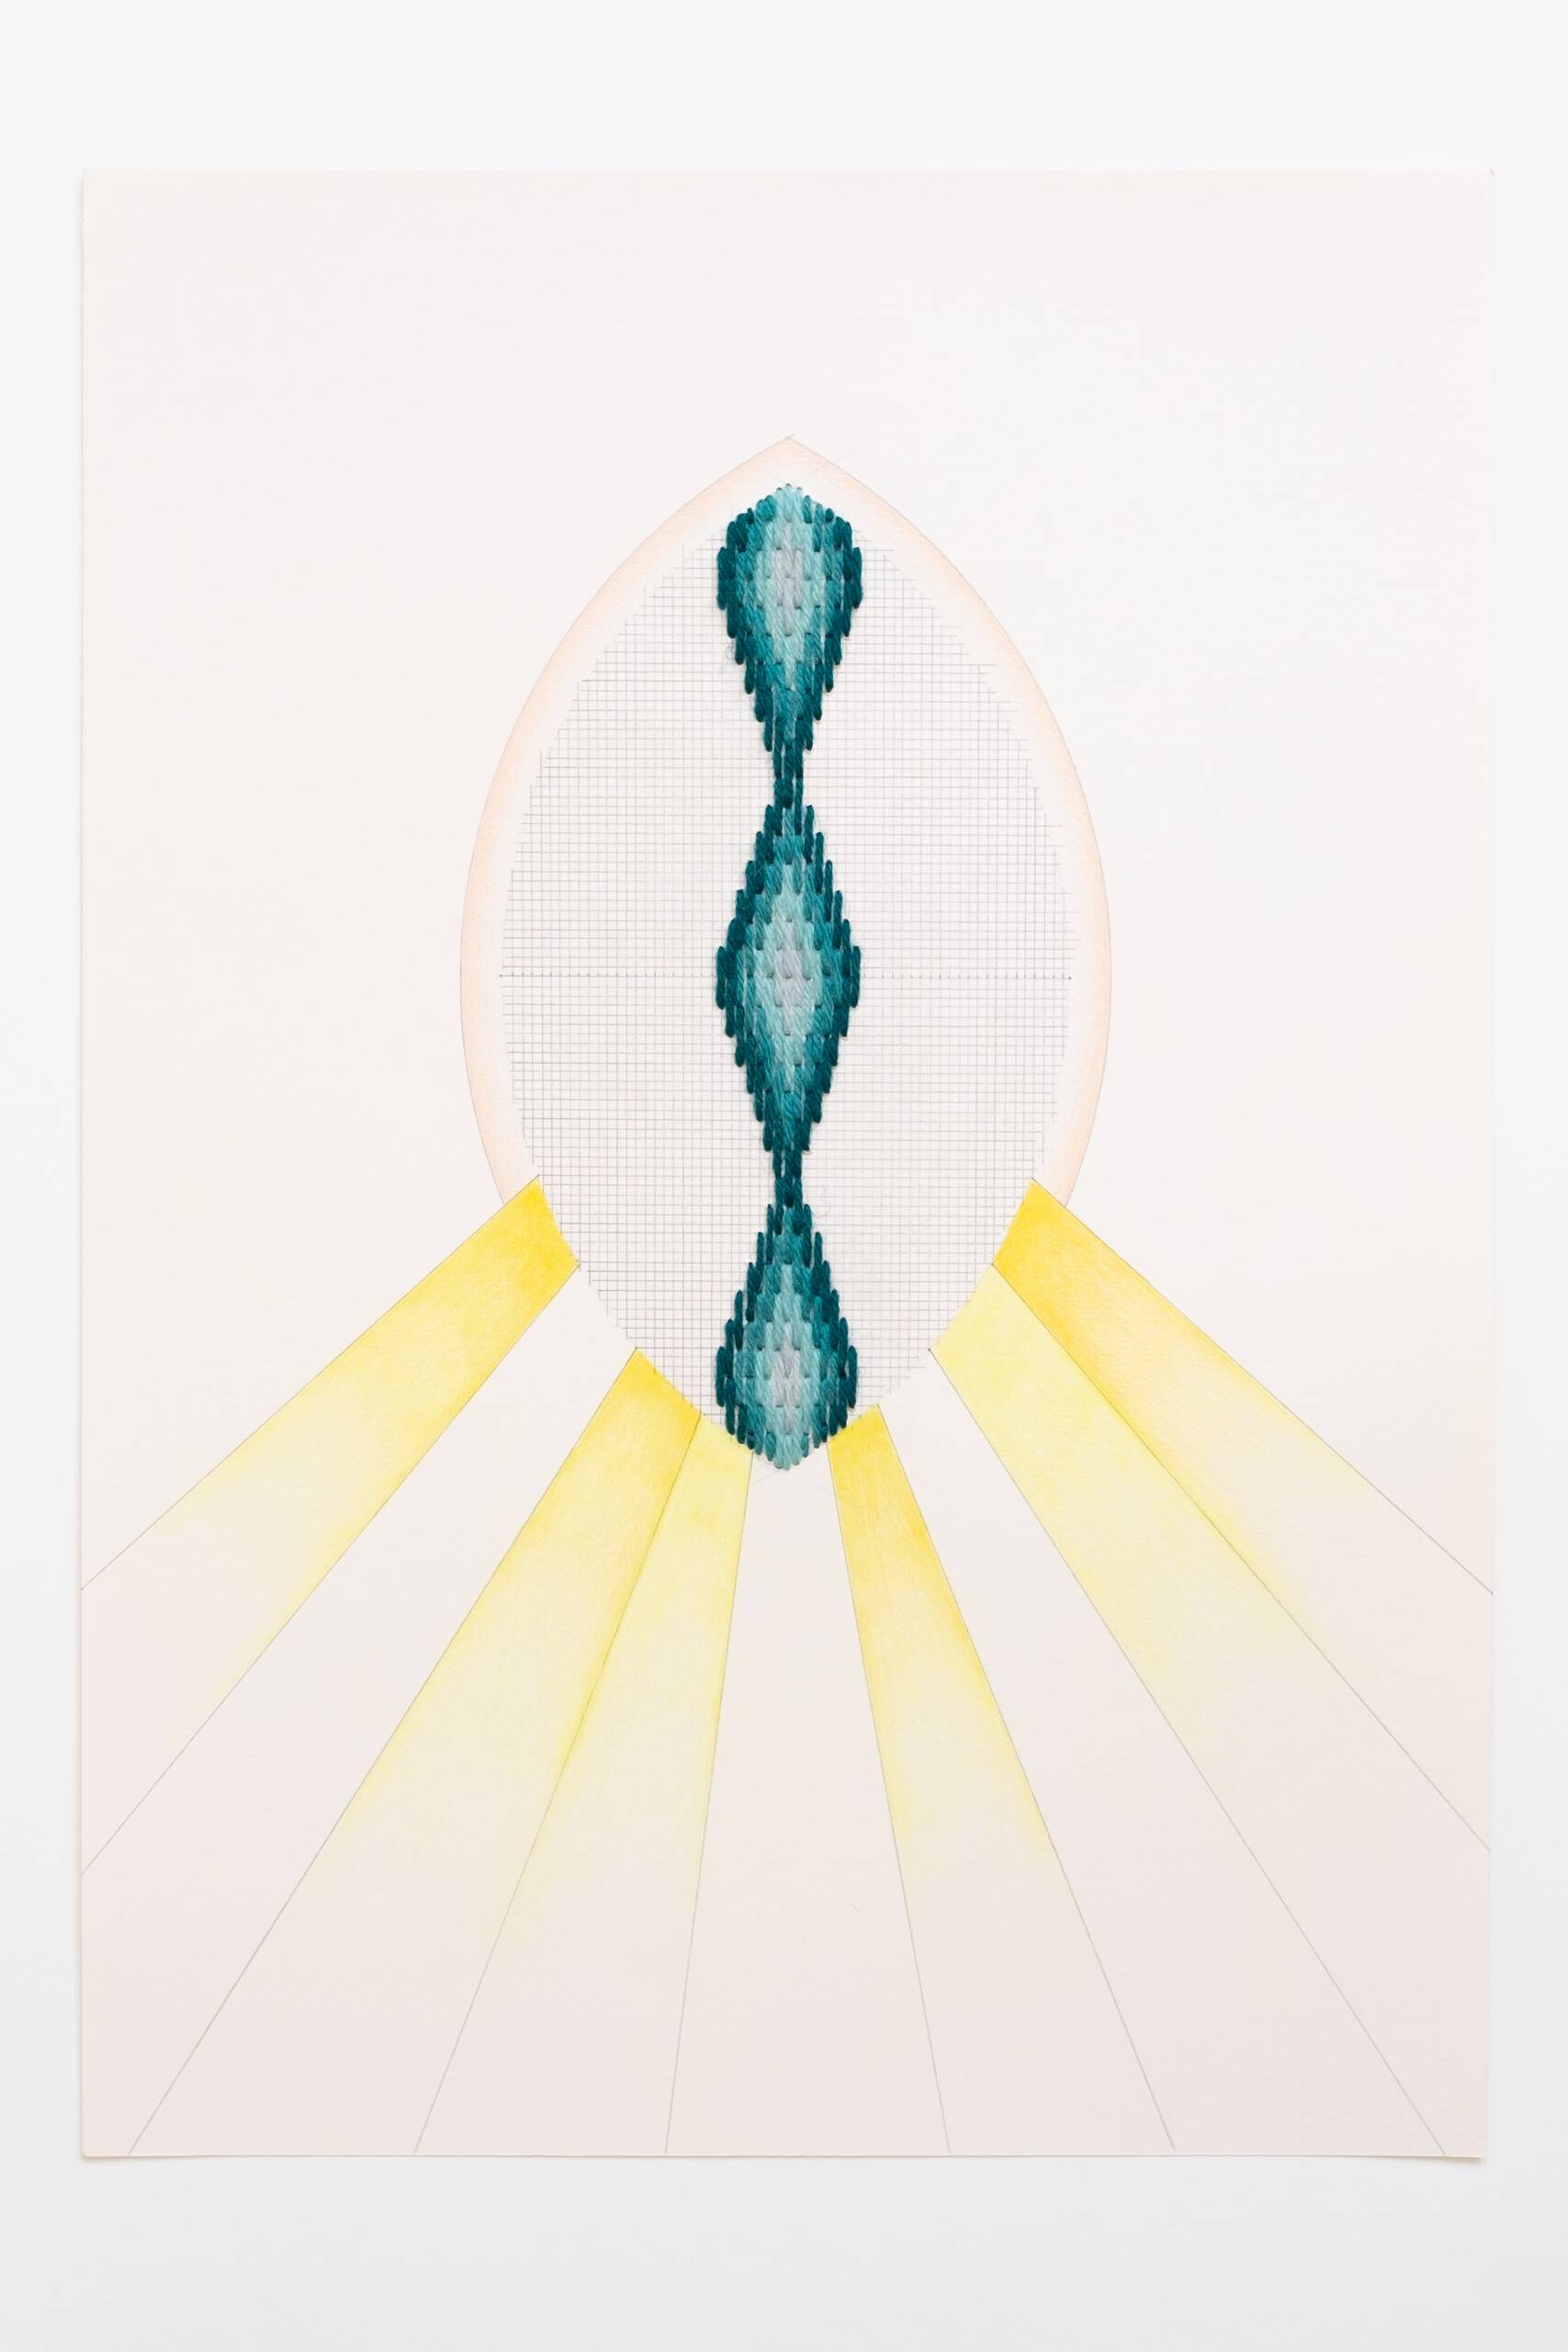 Bargello vesica piscis [teal on peach], Hand-embroidered wool, pencil and colored pencil on paper, 2020